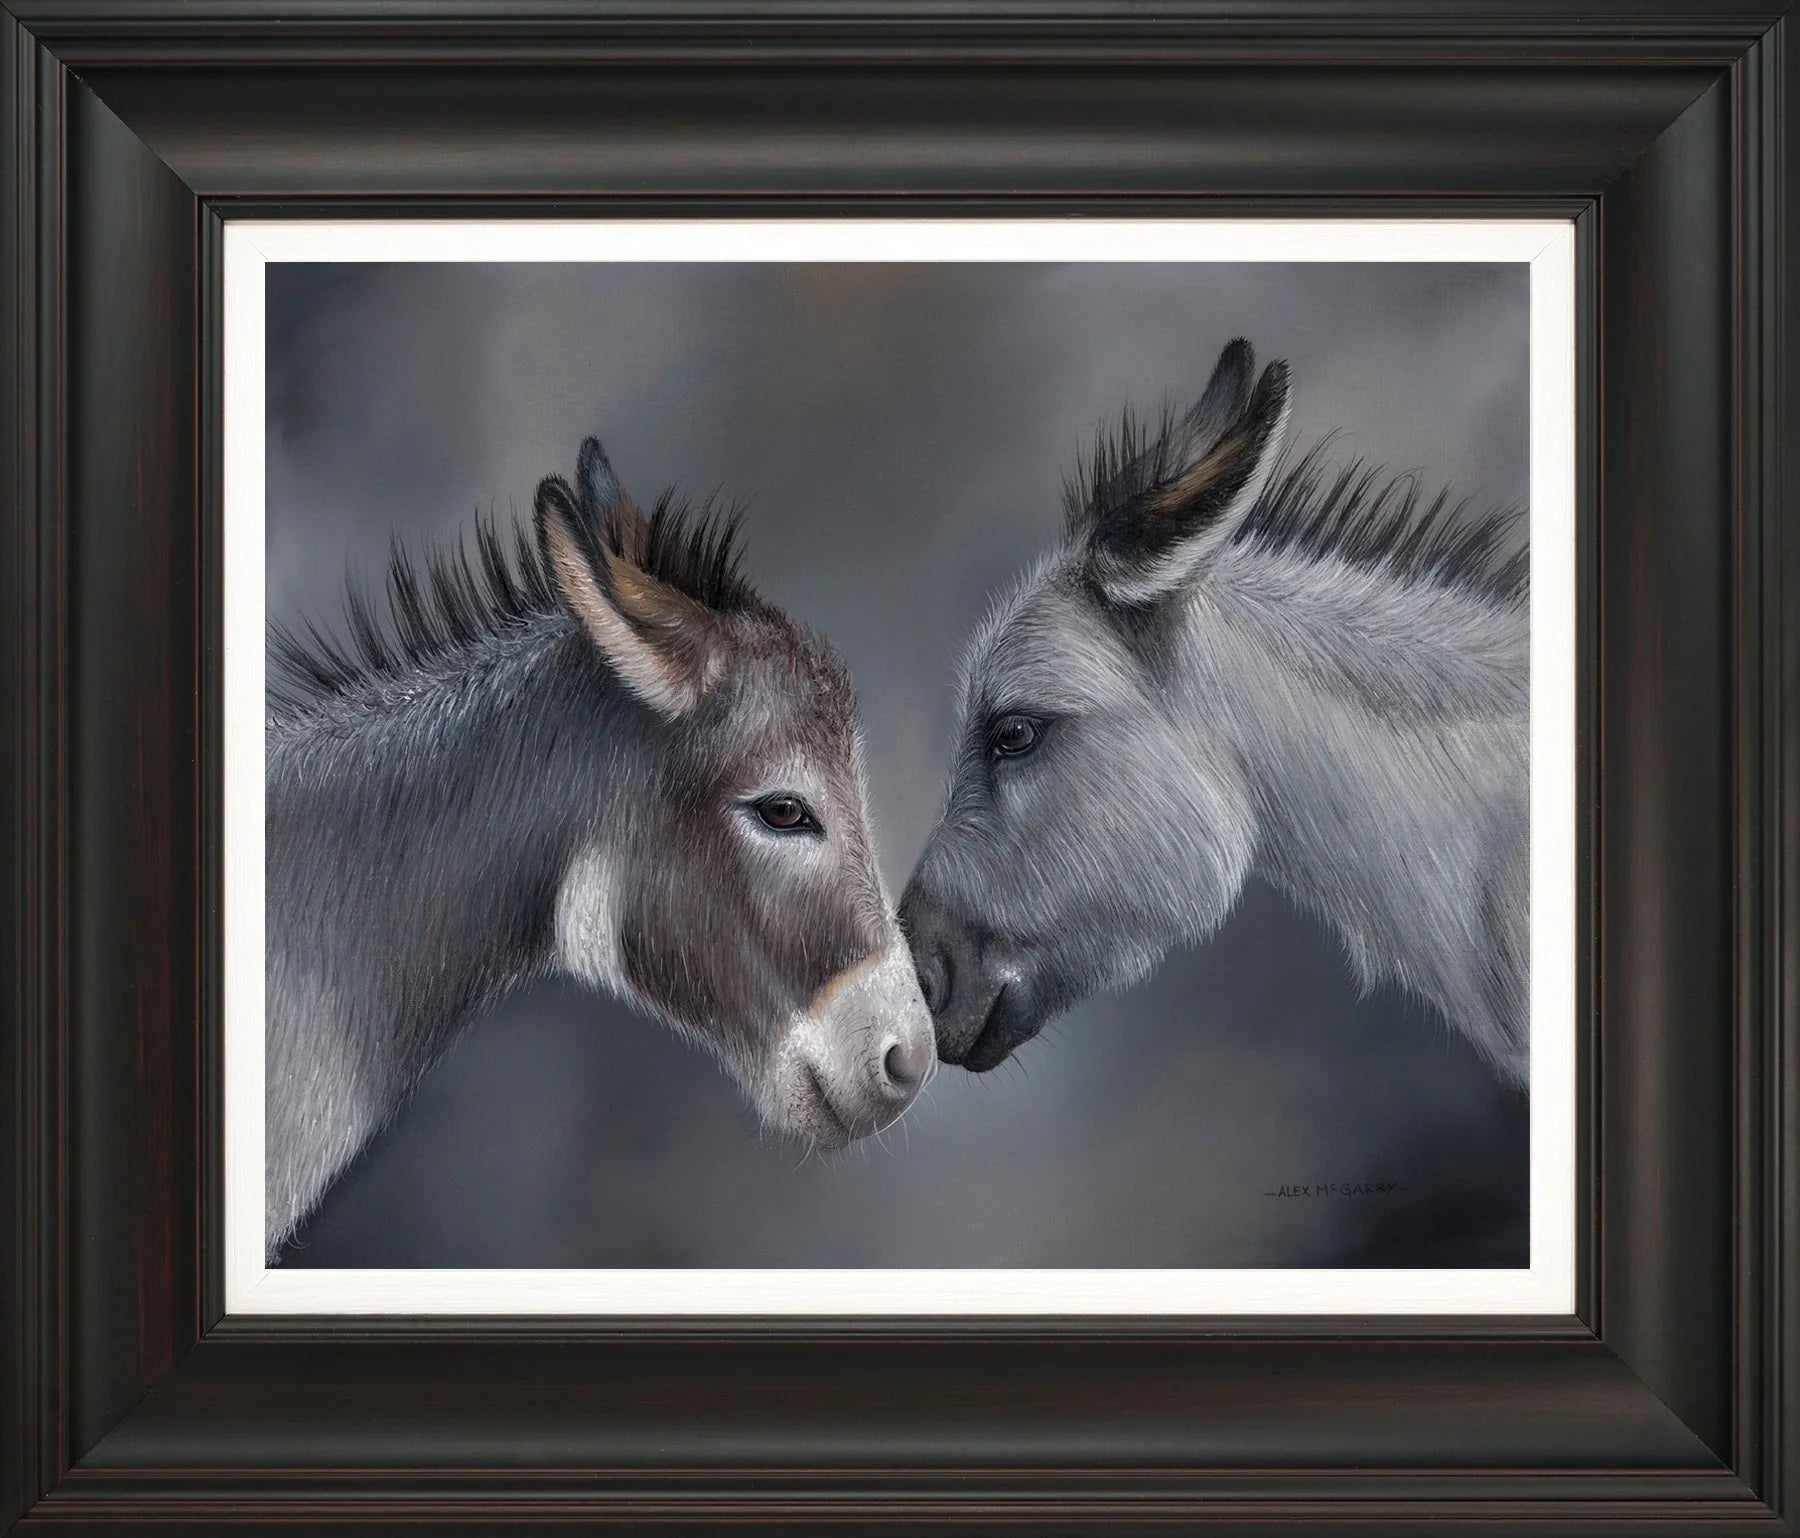 Alex McGarry - 'Best Friends' - Framed Limited Edition